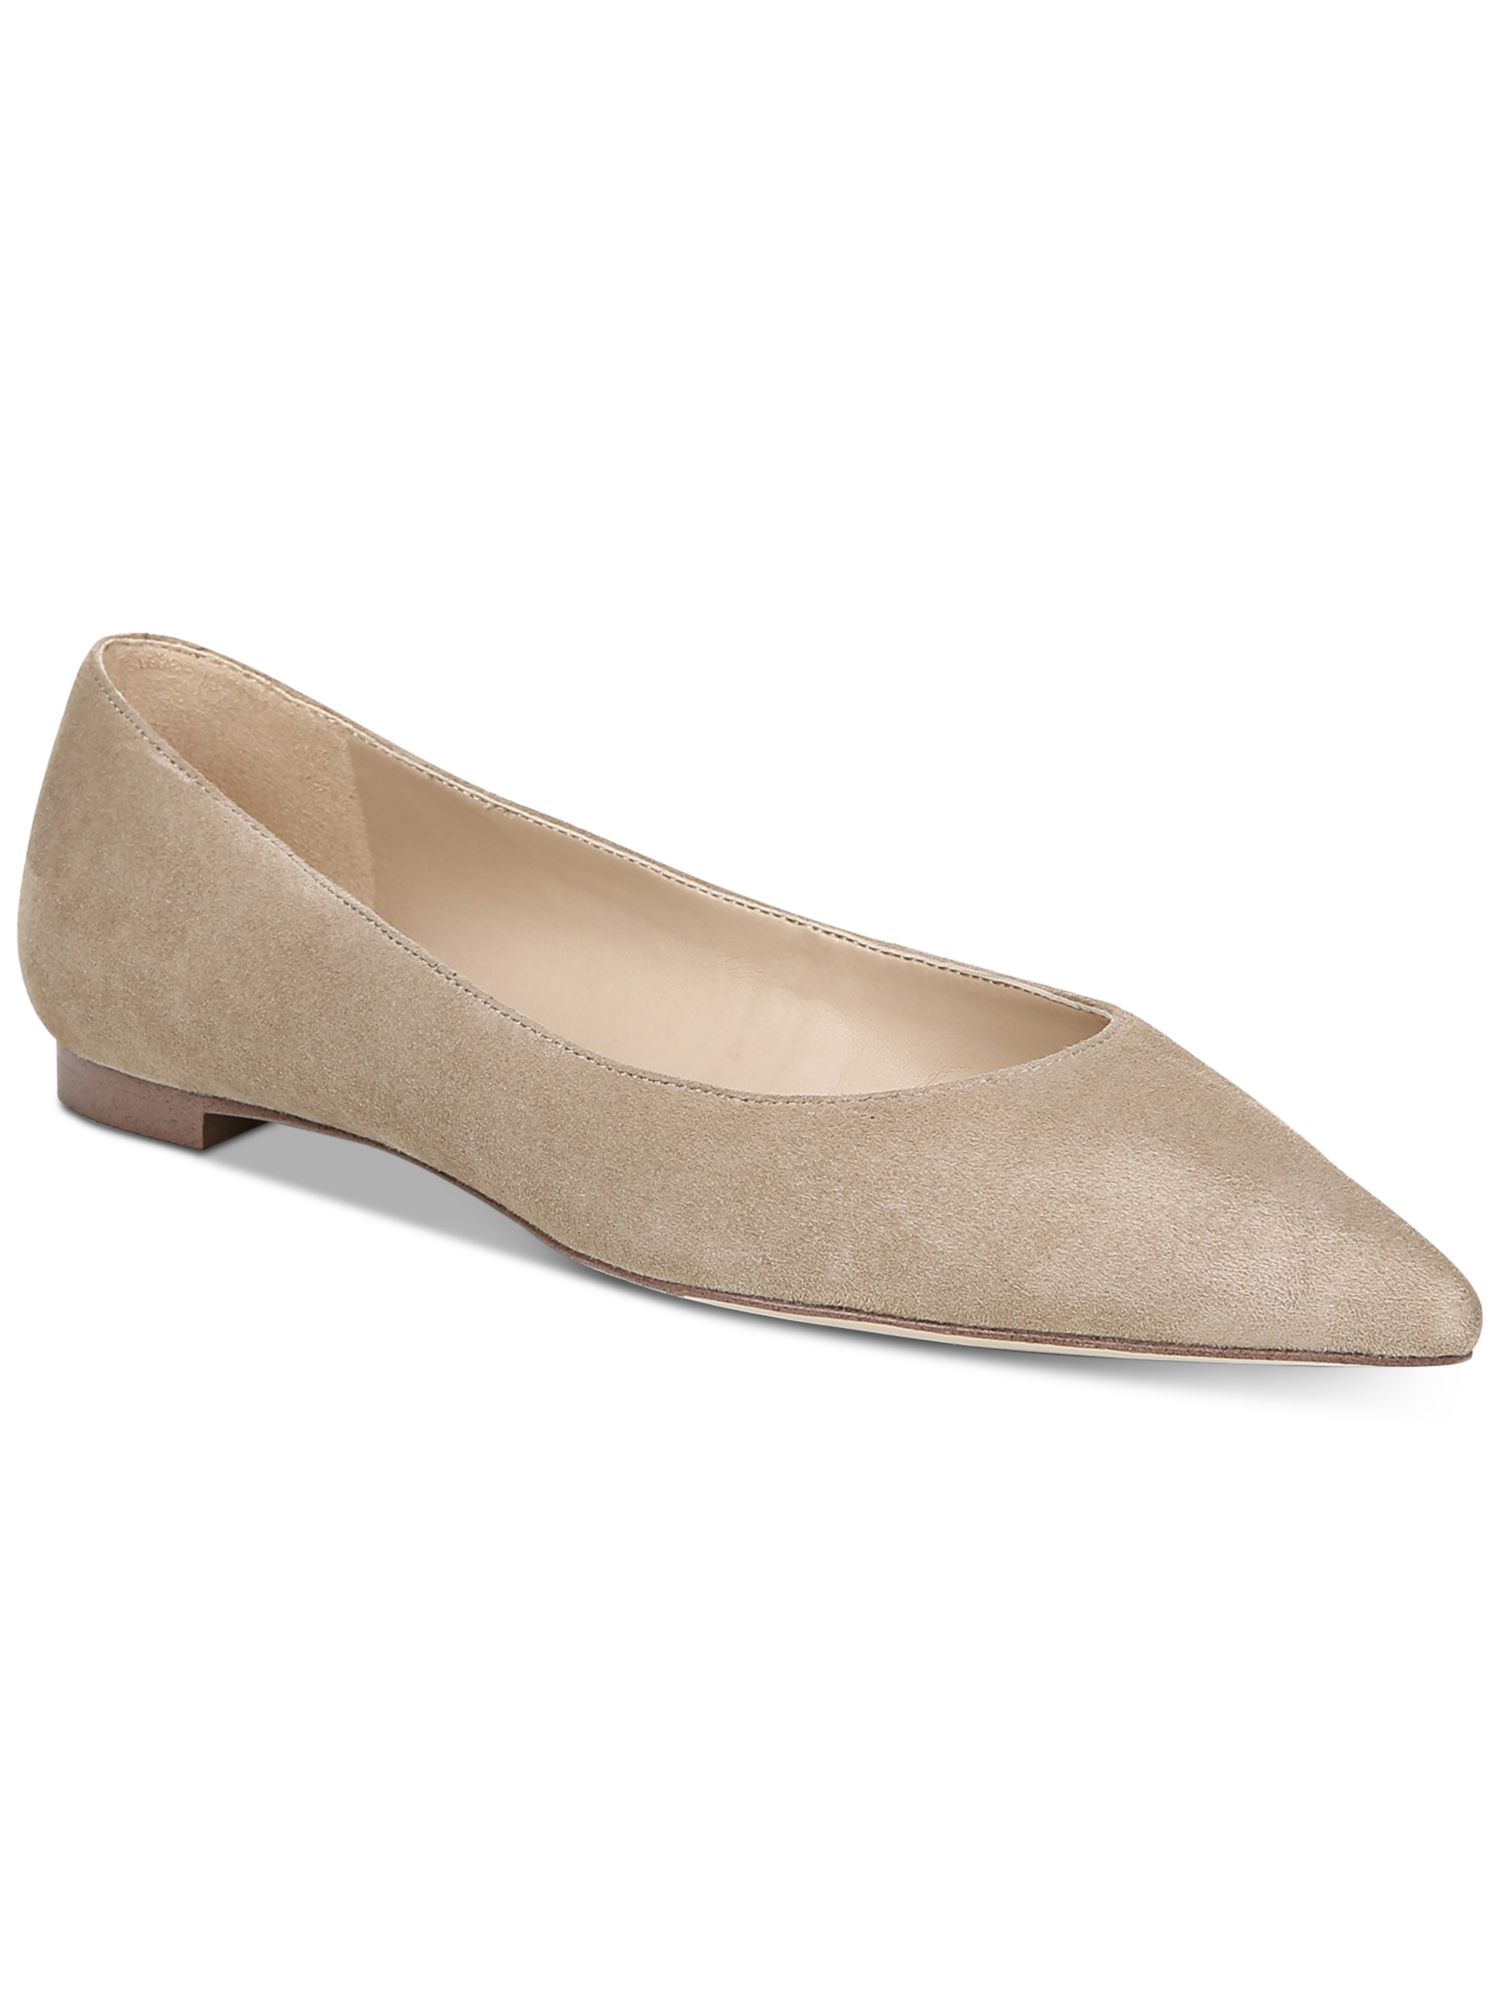 SAM EDELMAN Womens Beige Cushioned Comfort Sally Pointed Toe Slip On Leather Ballet Flats 6 M